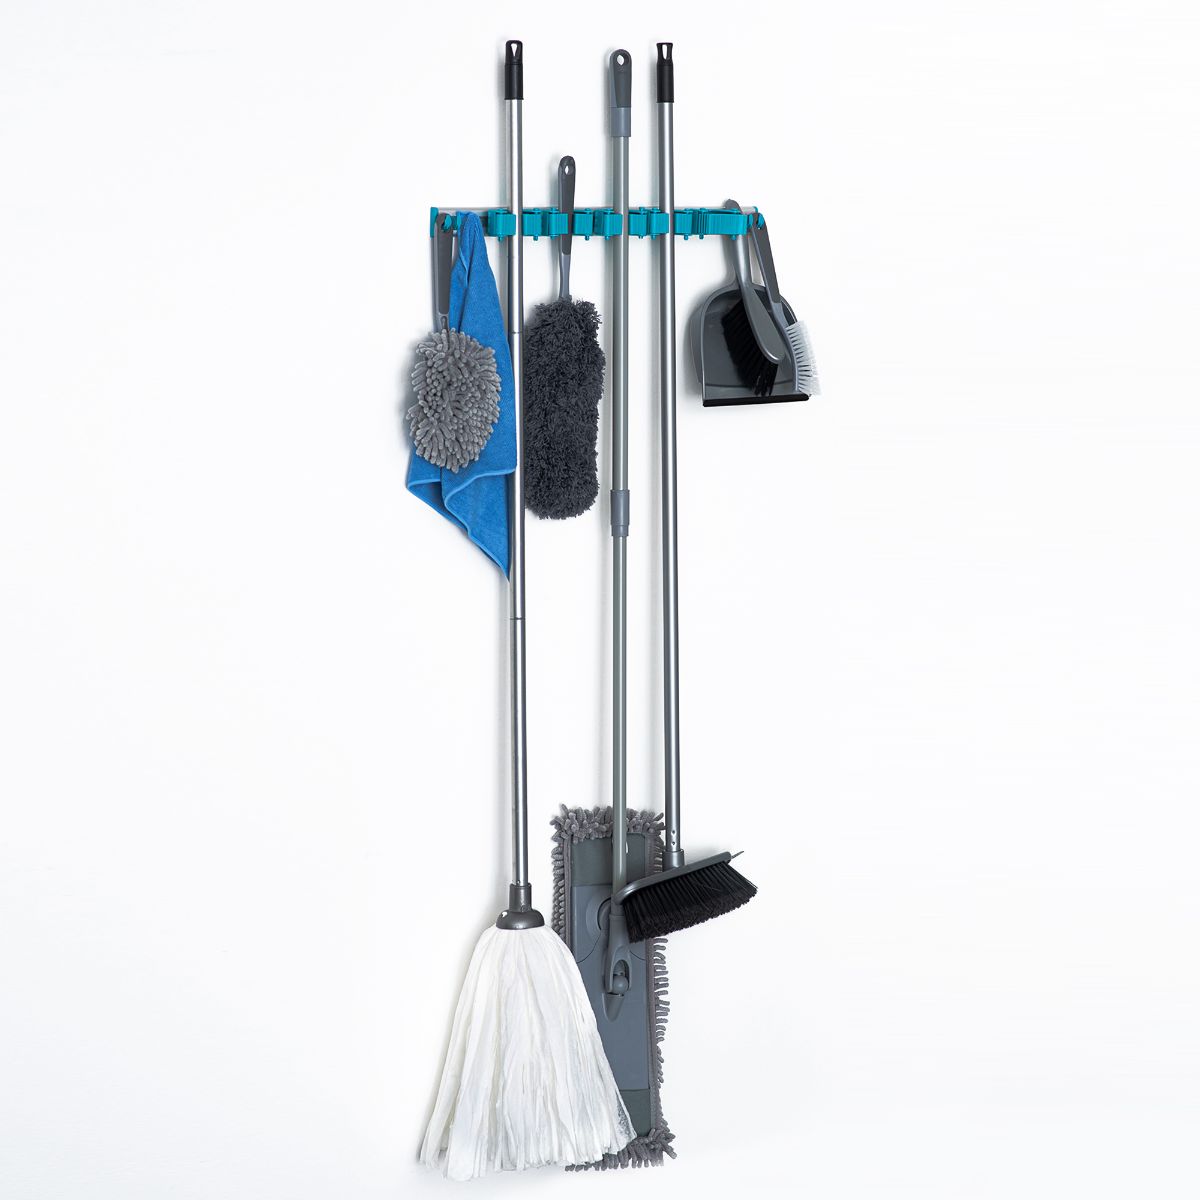 Wudore 5-Layer Wall Mounted Organizer Mop And Broom Holder